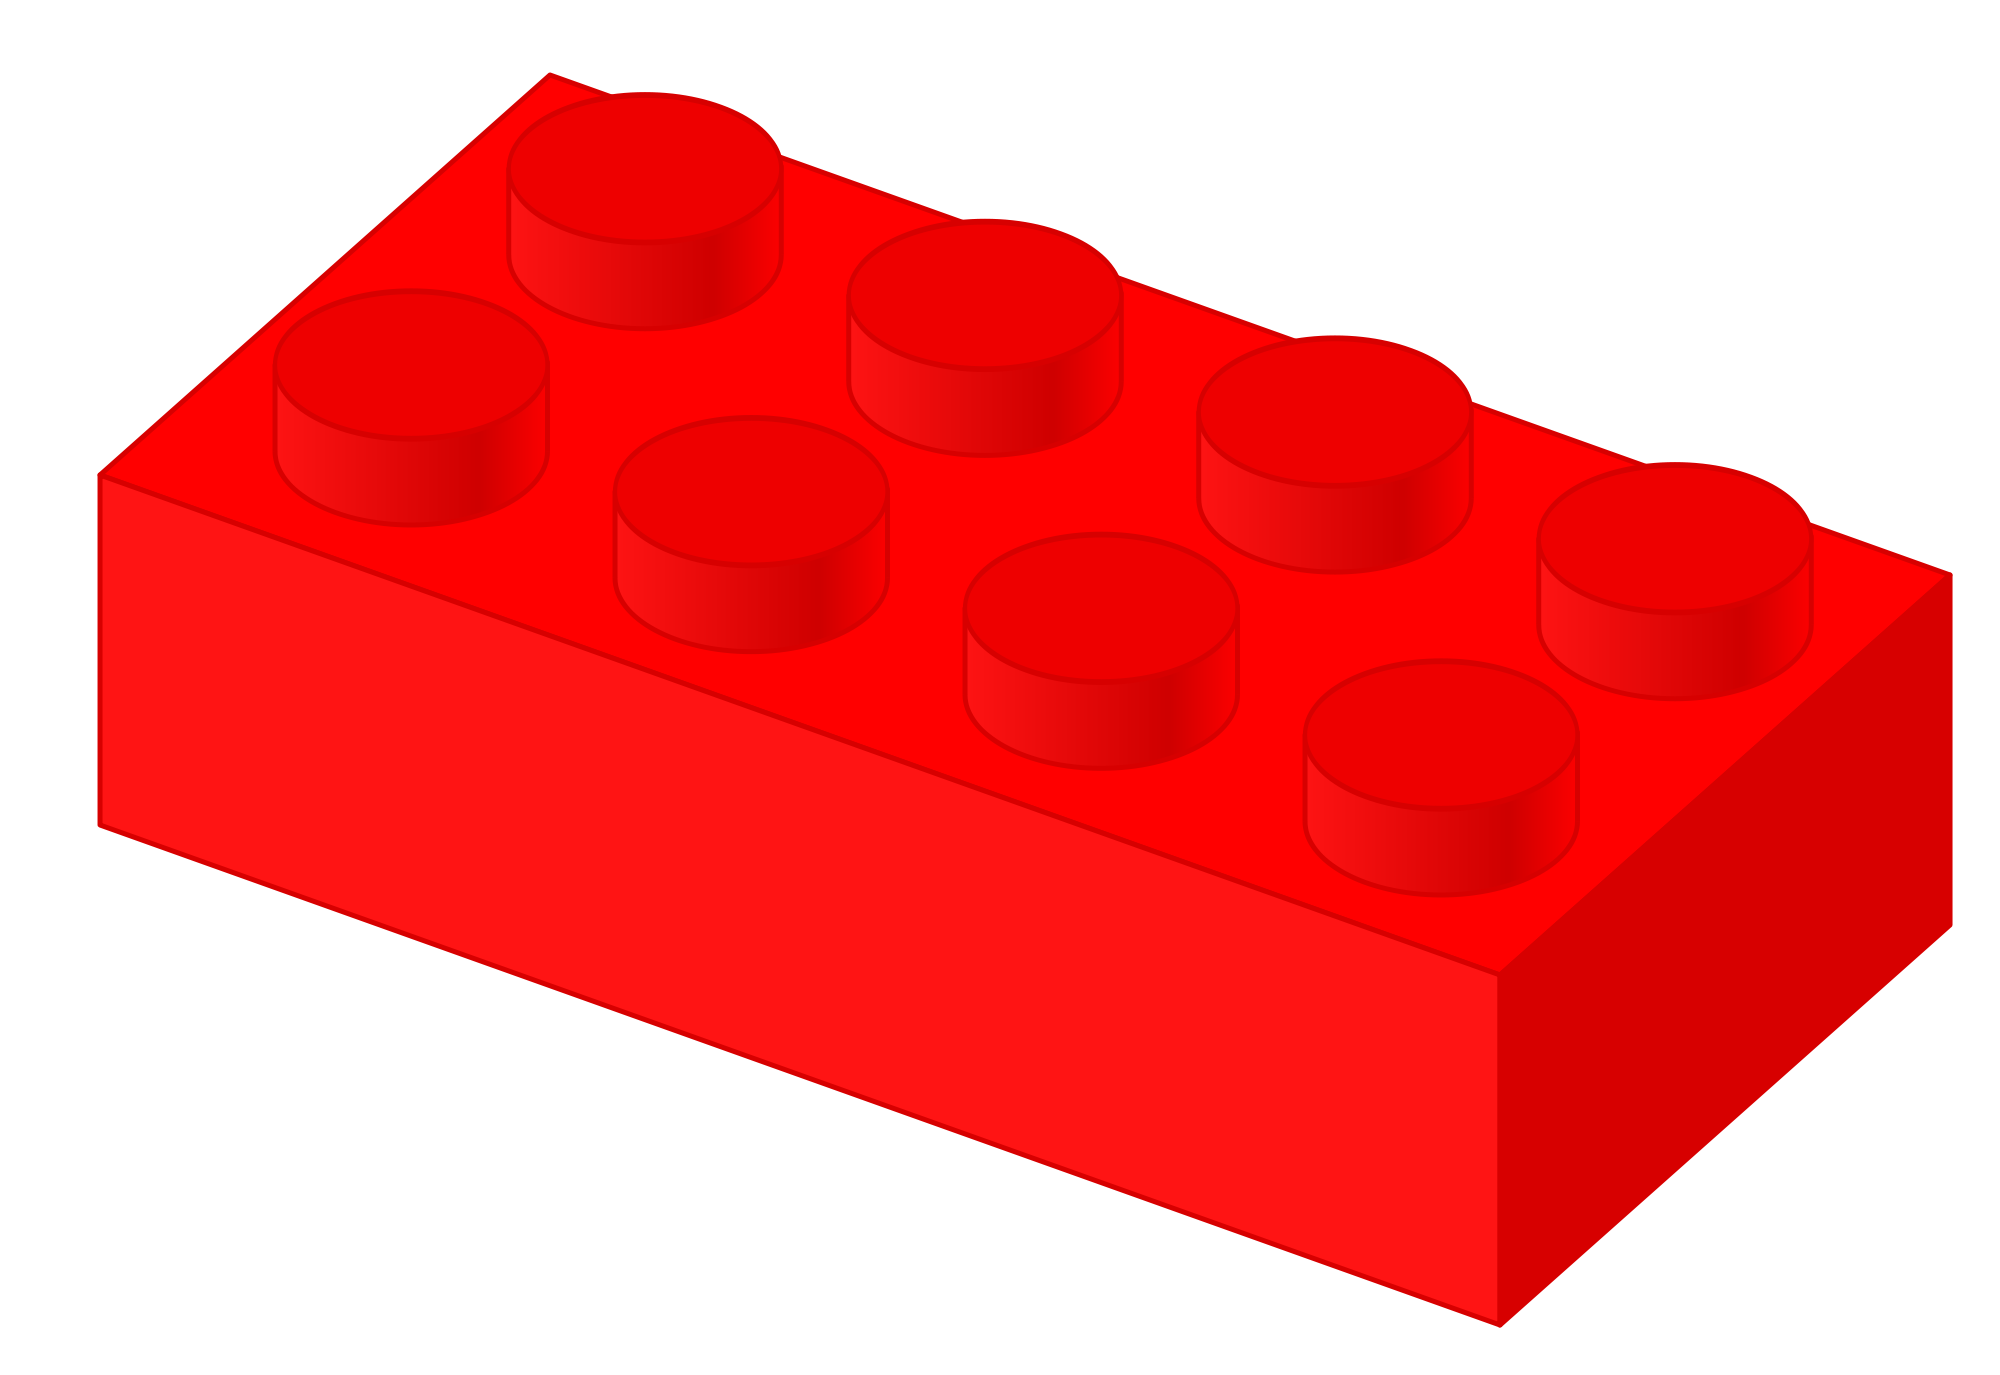 Best Free Red Lego Blocks Image PNG Transparent Background, Free Download  #46626 - FreeIconsPNG